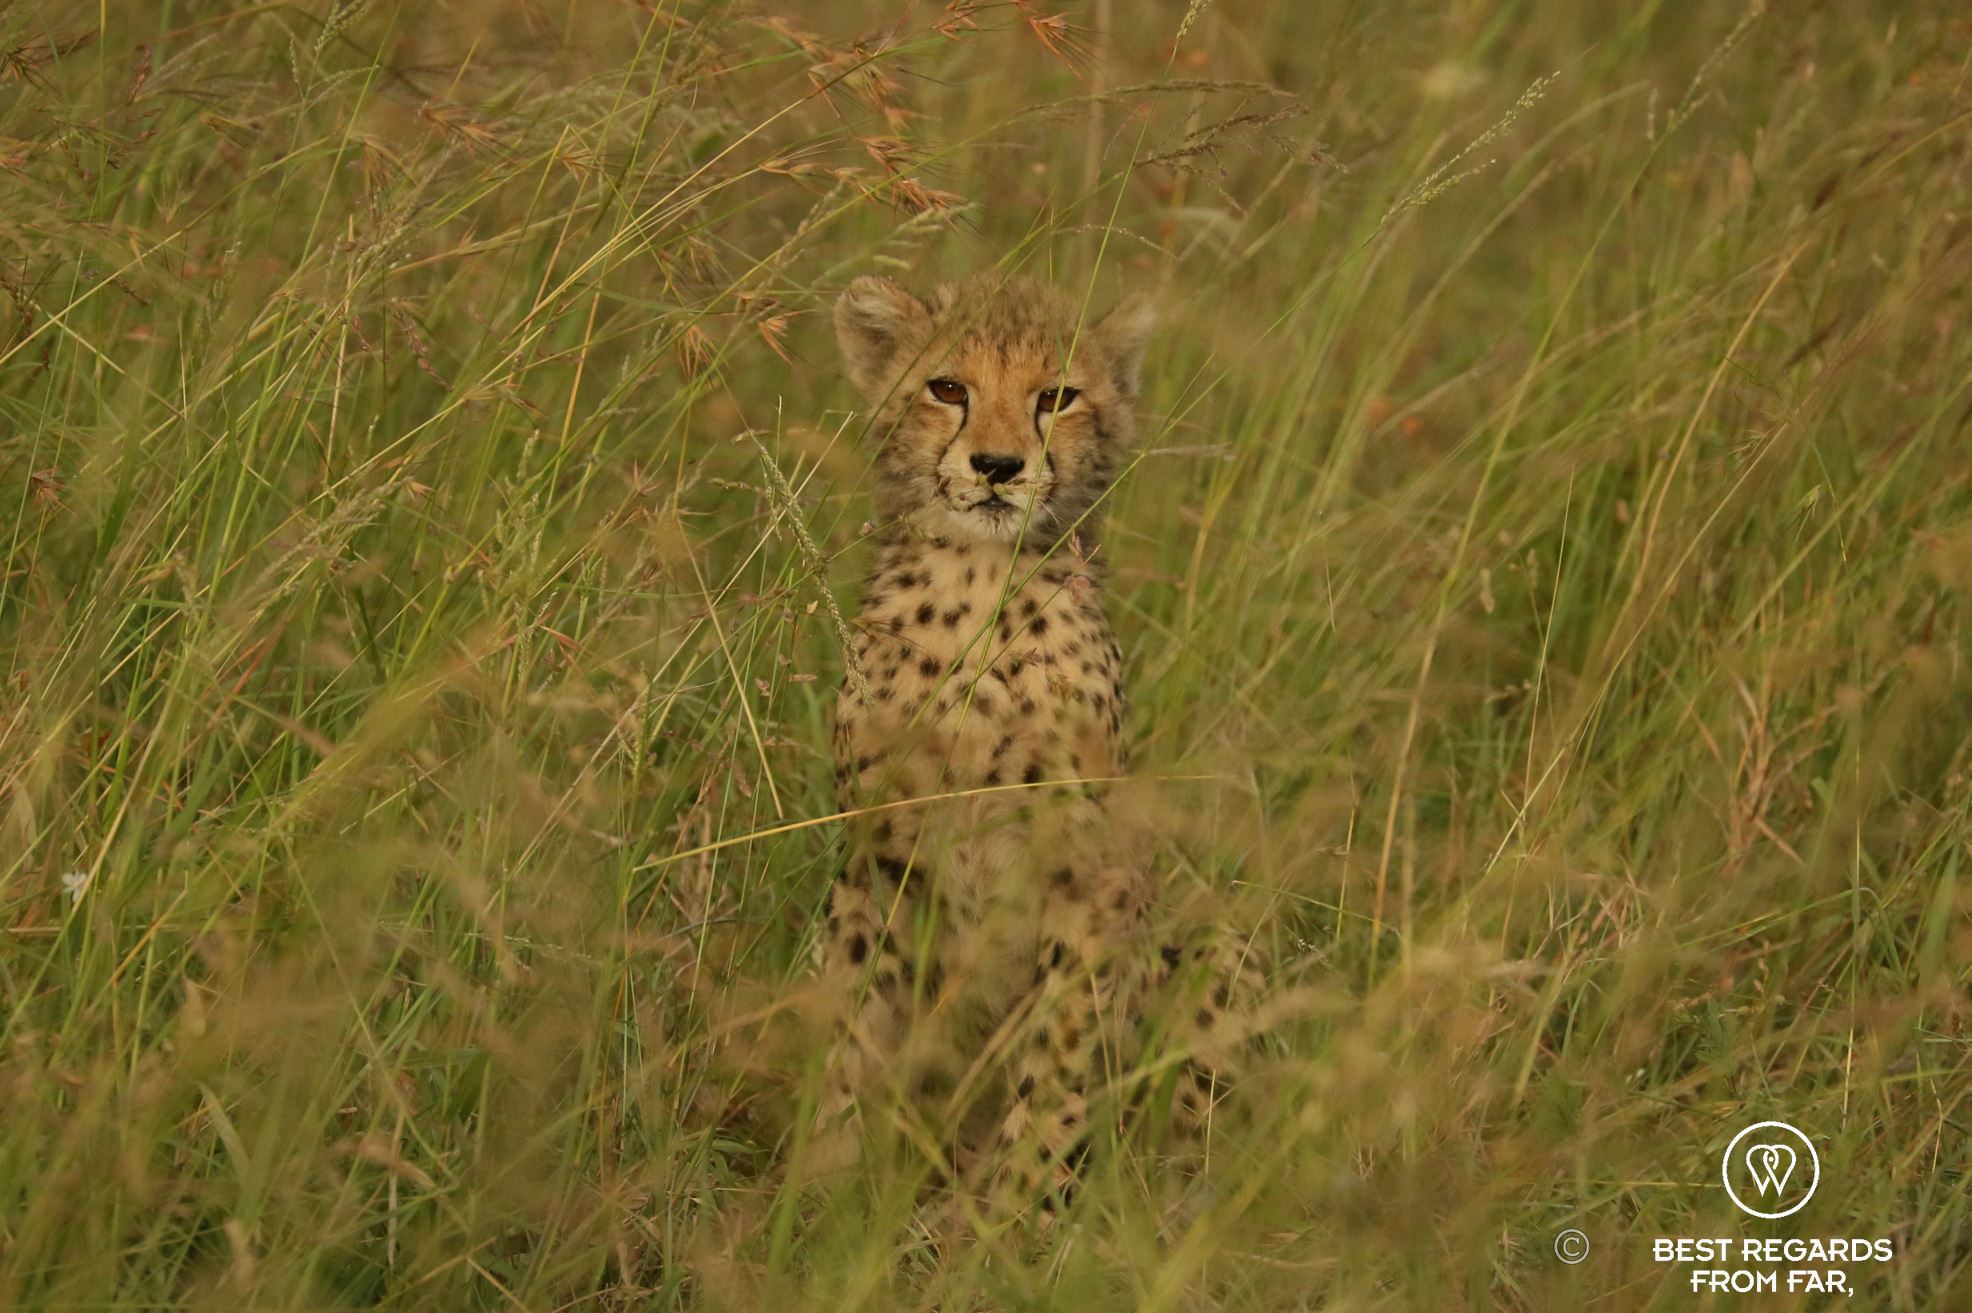 Cheetah cub in its natural environment of green grass looking into the camera. Phinda Private Game Reserve, South Africa.